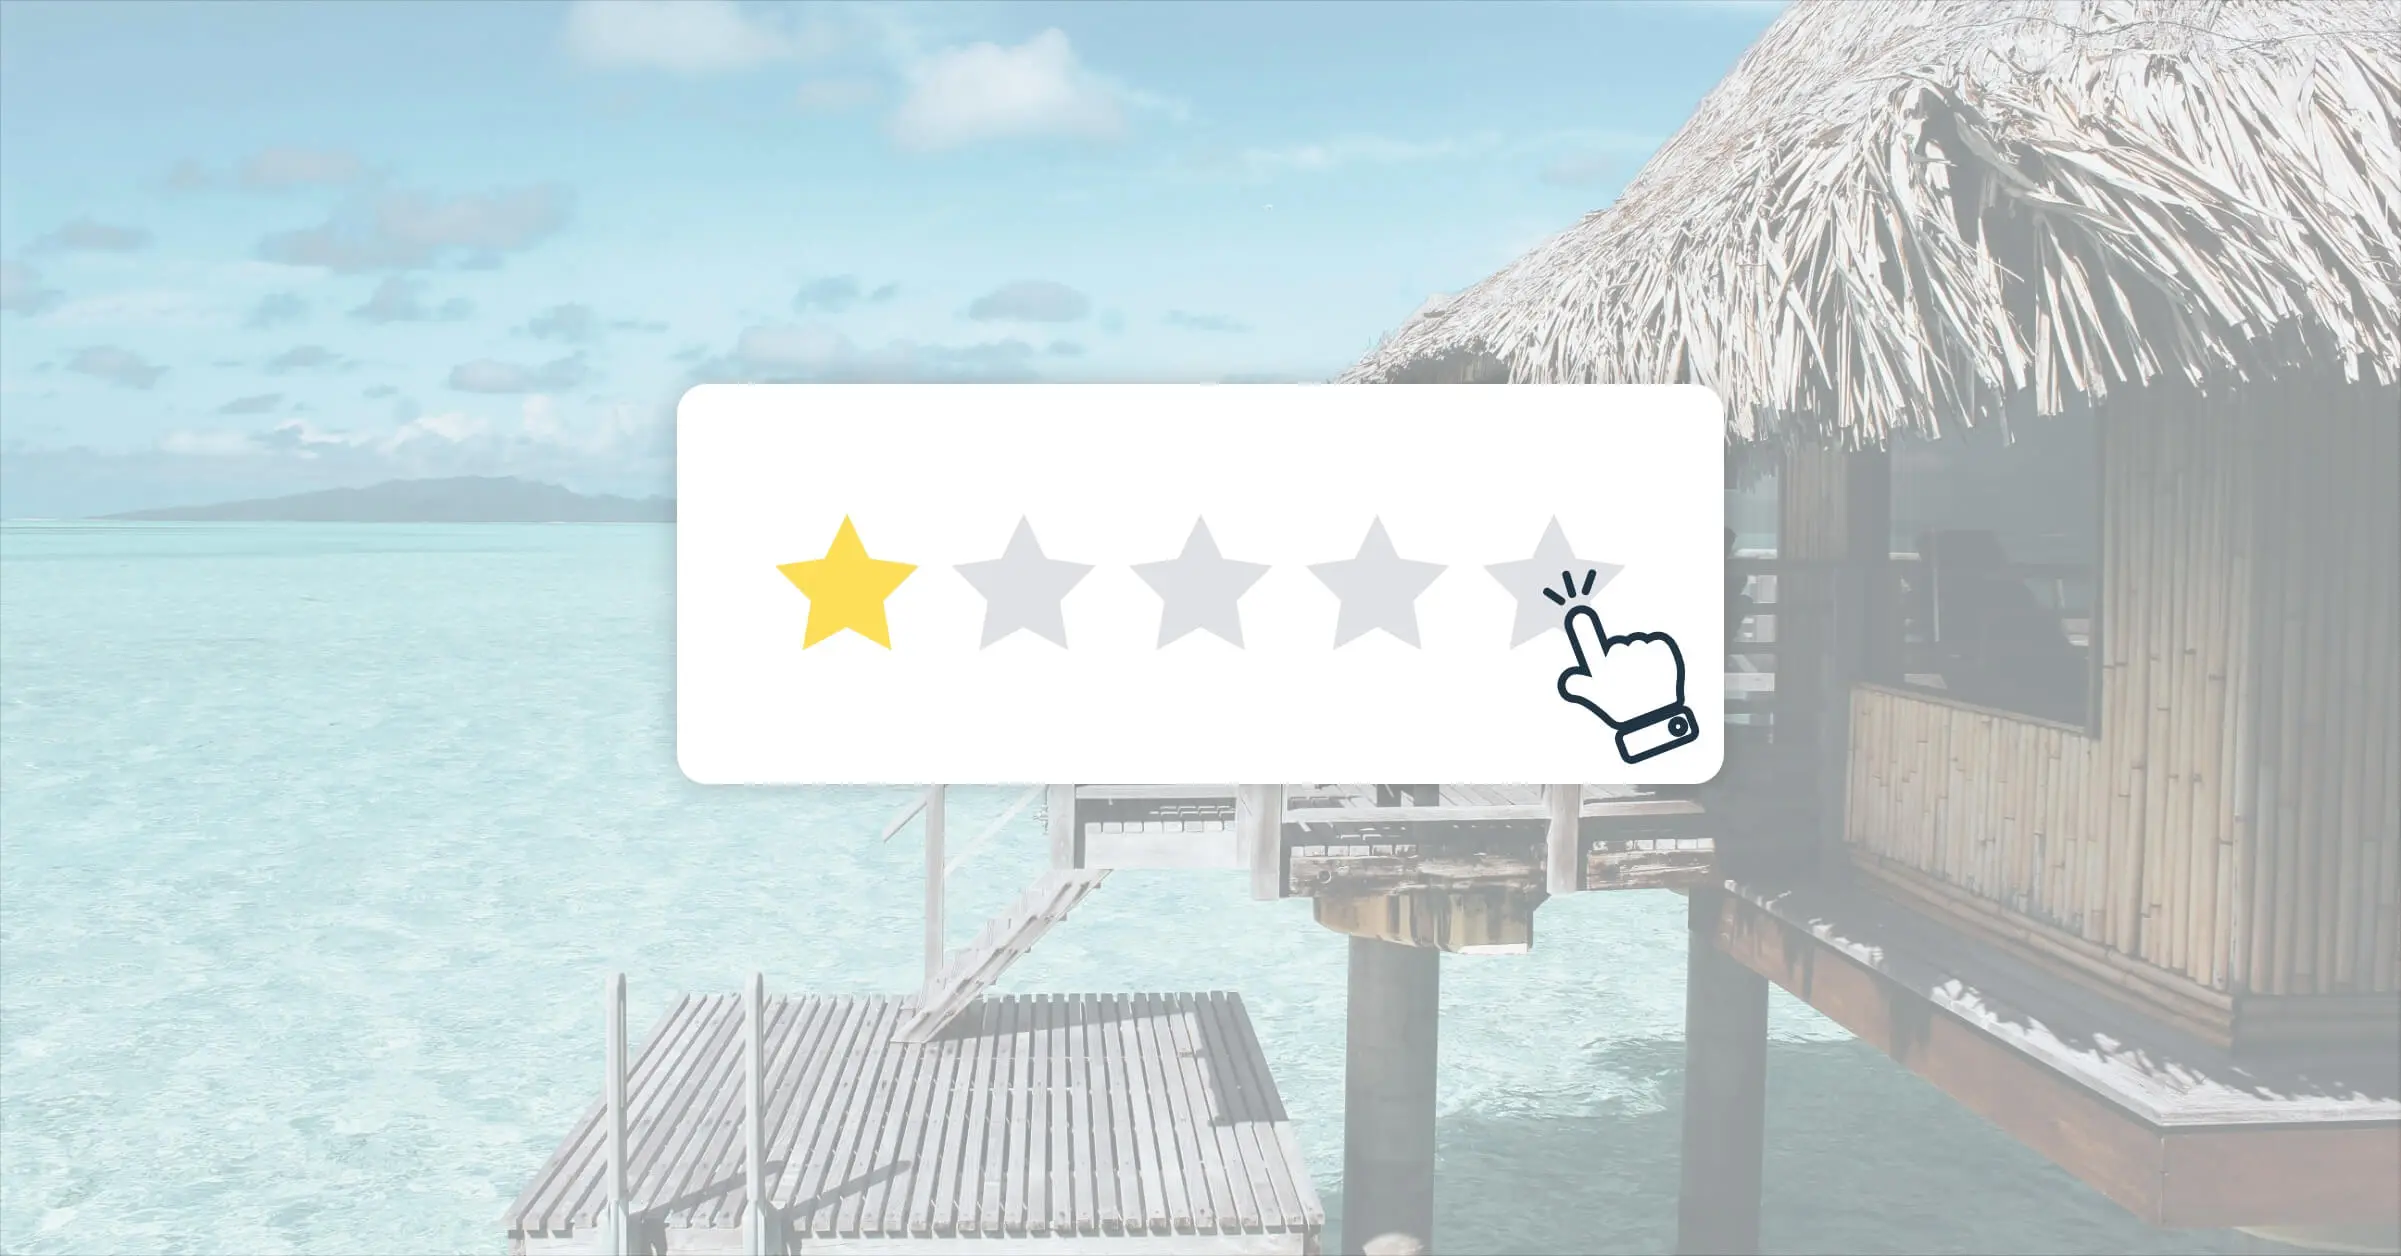 Here's how to improve hotel guest satisfaction and get 5-star reviews